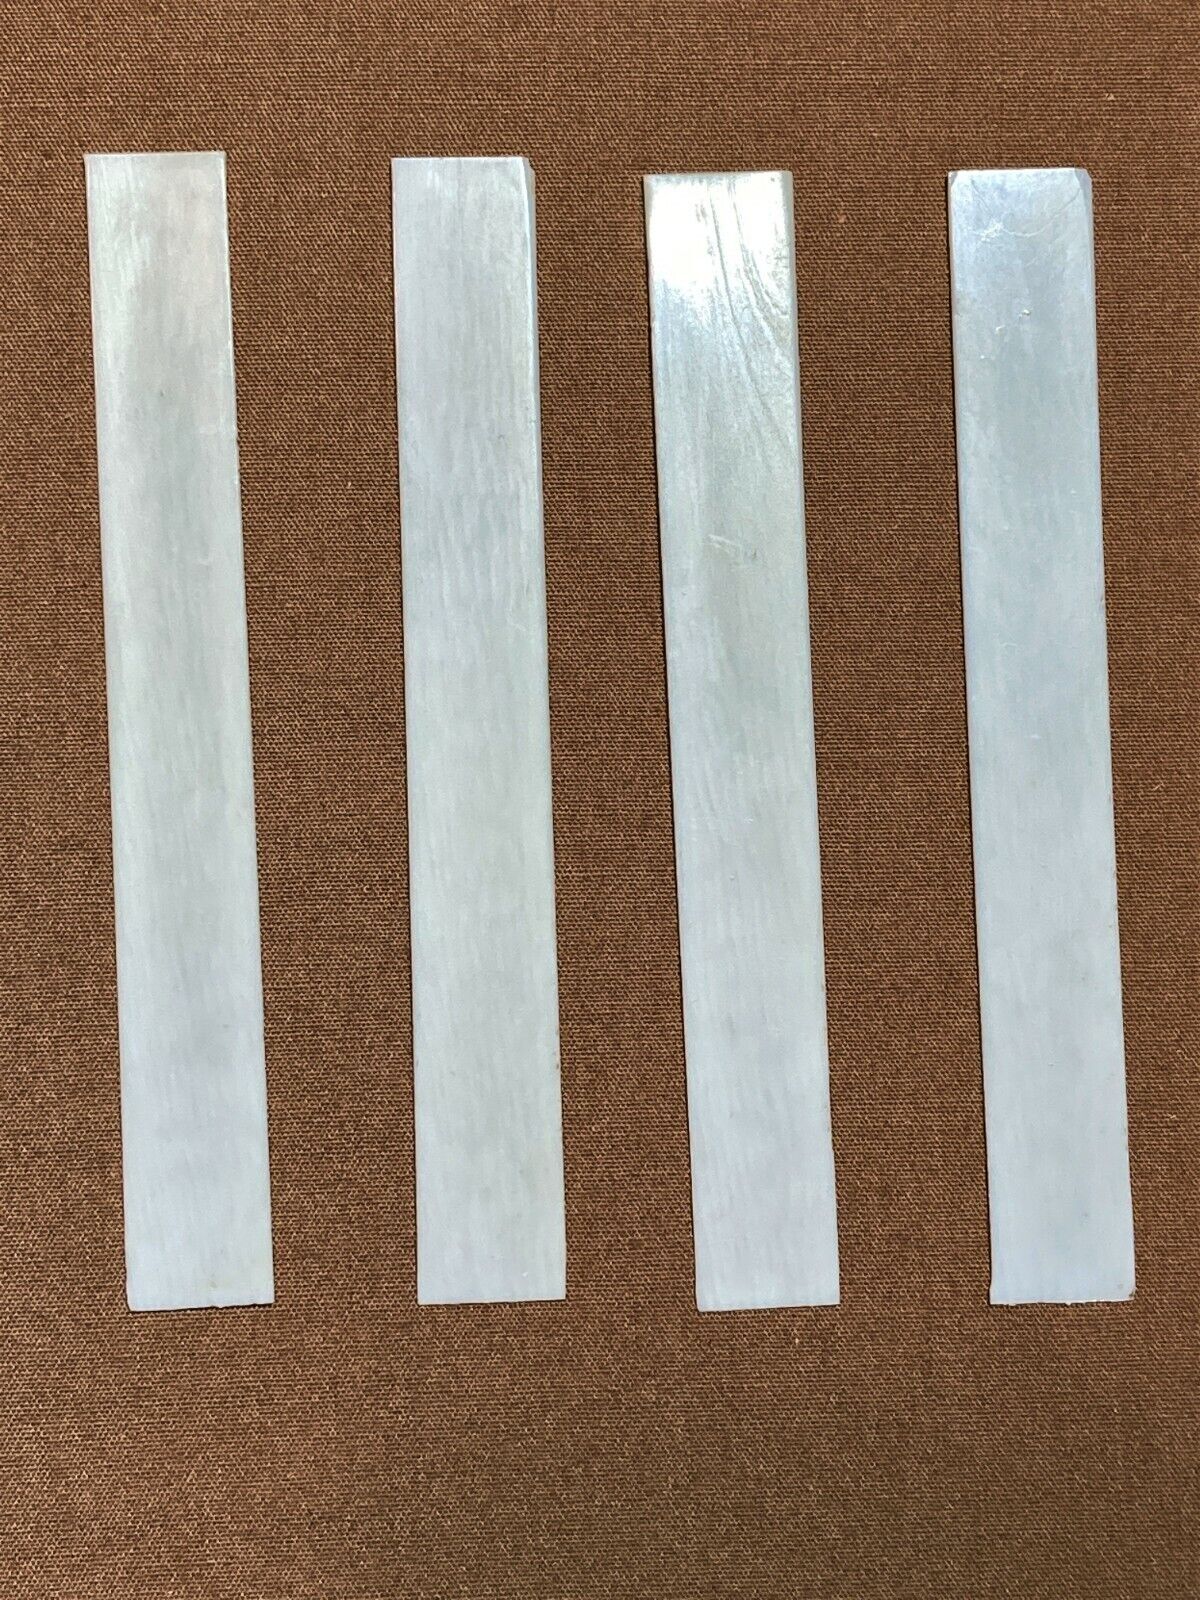 4 Pieces of Antique Piano Key Veneer from 1896 Vose, Salvage, Repurpose, Crafts Unbranded Does Not Apply